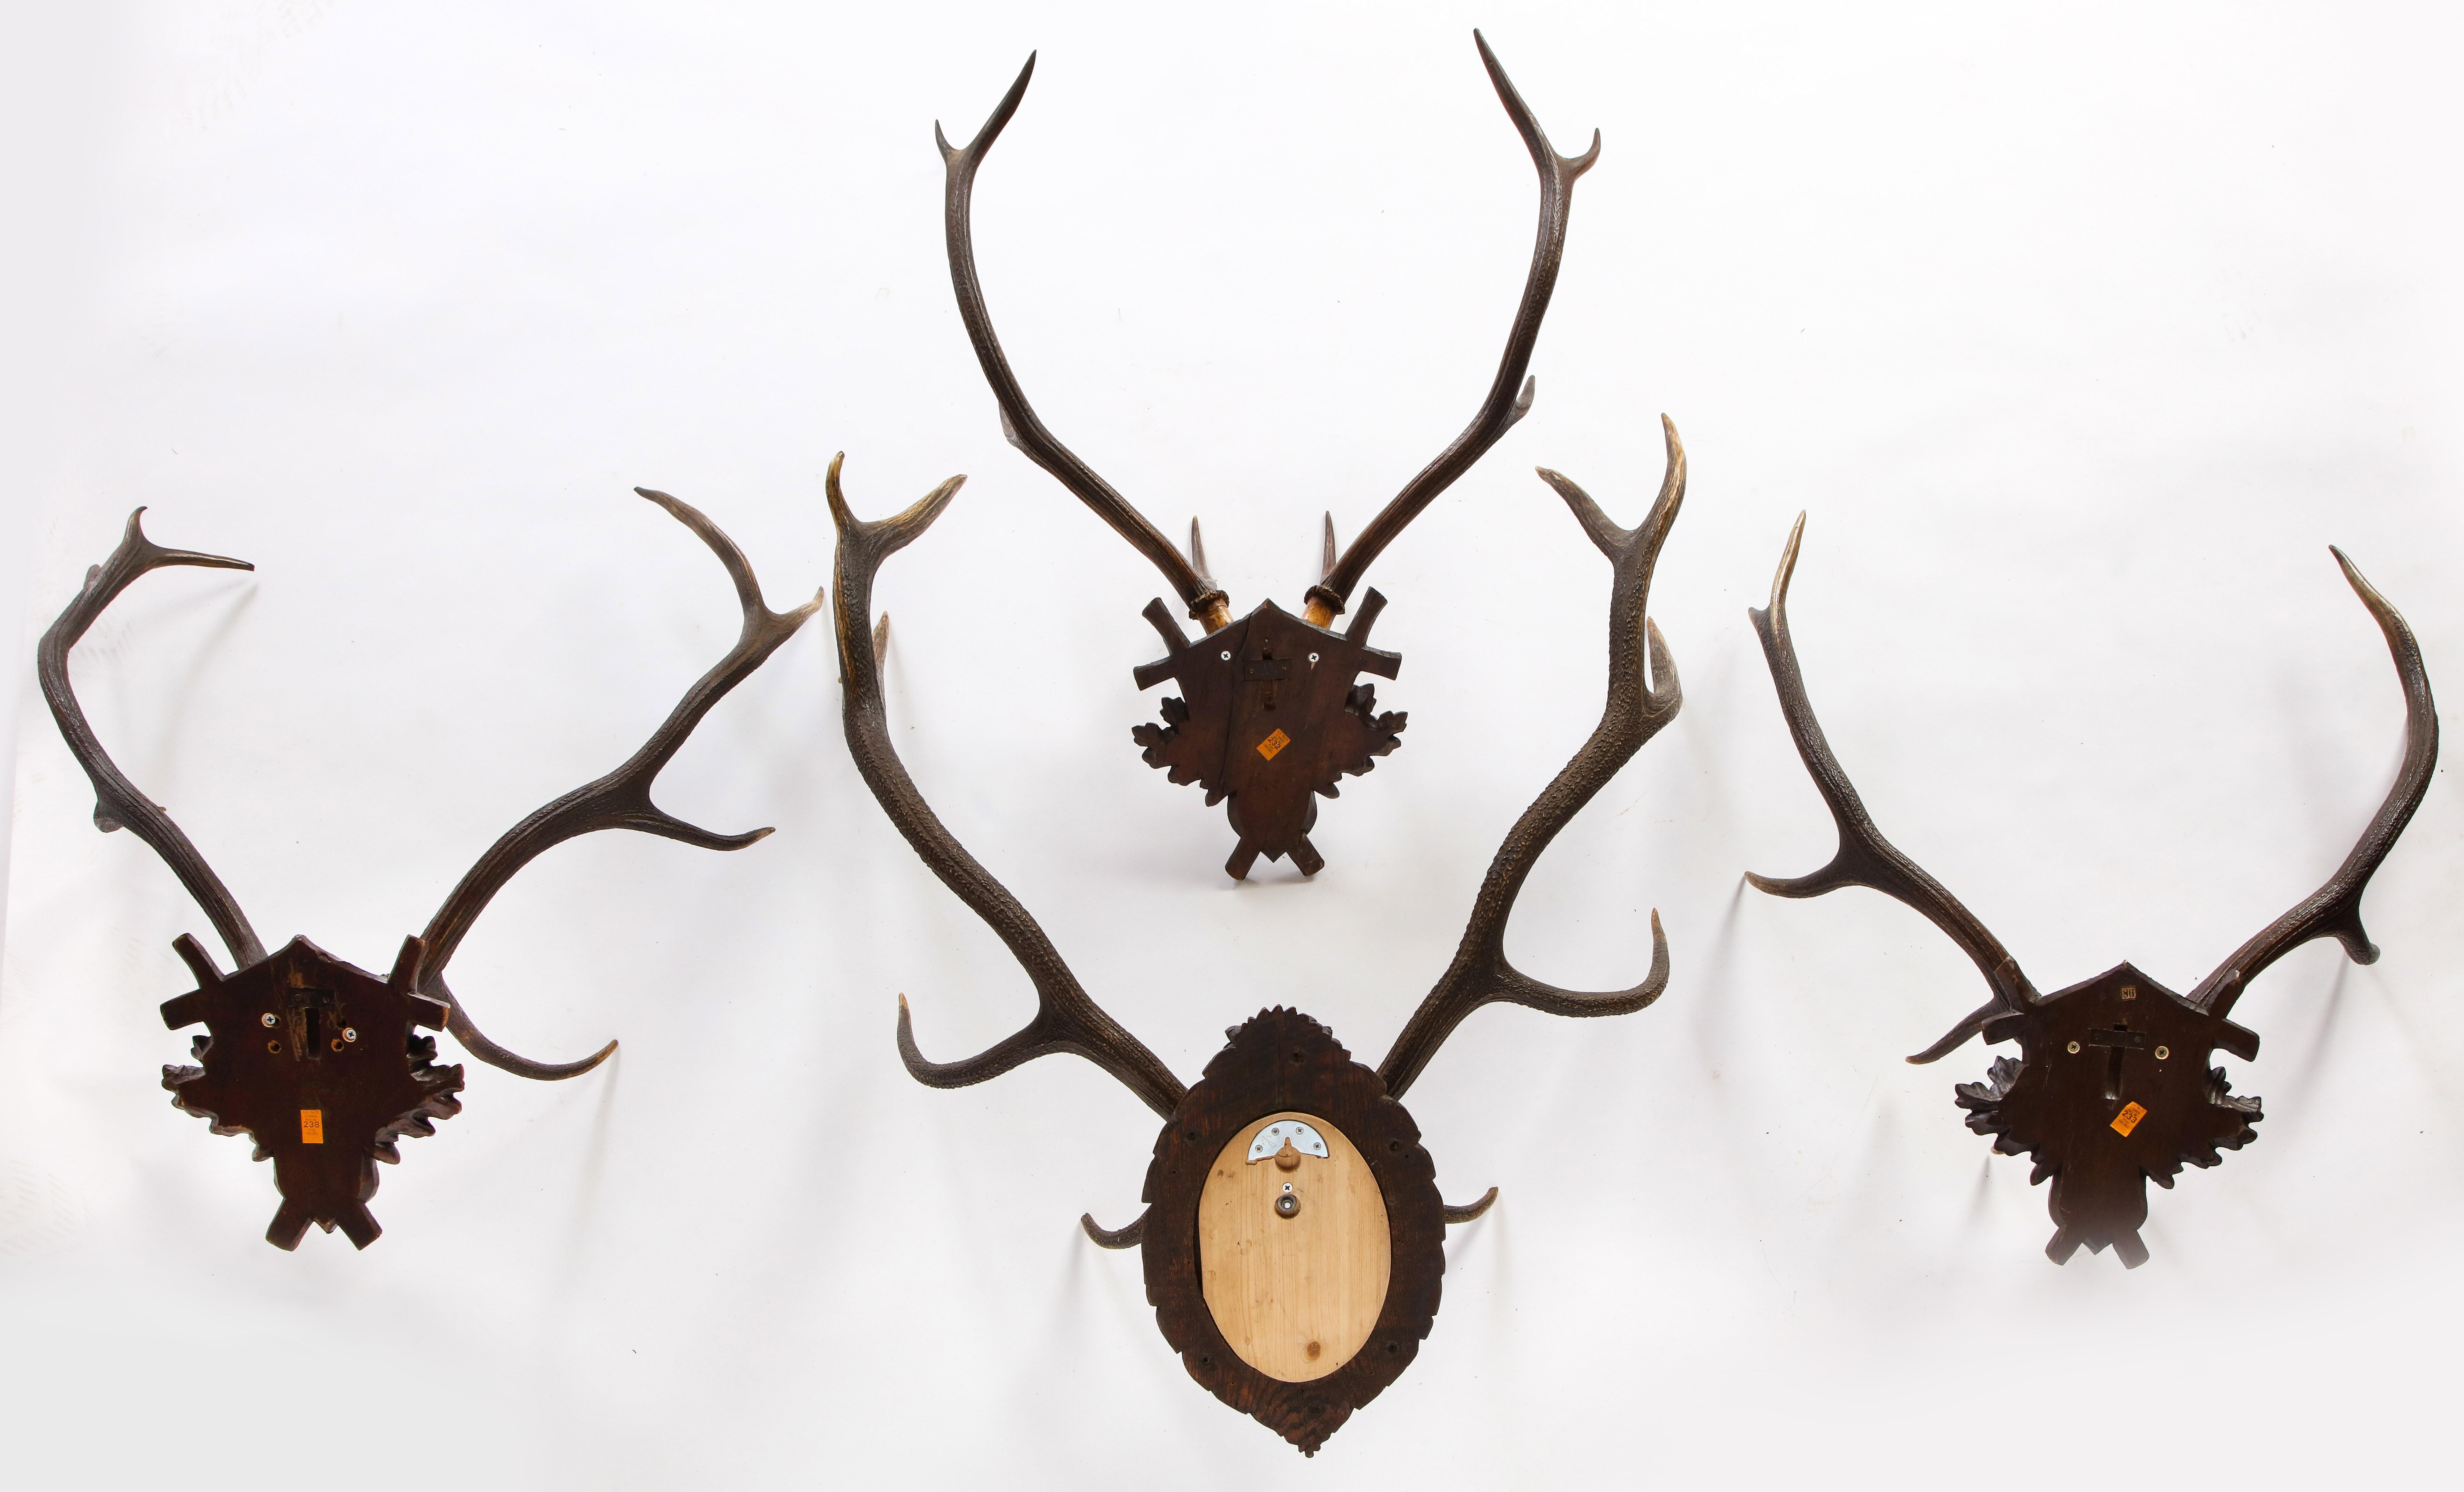 This set of four Swiss 'Black Forest' antler trophy mounts are composed of wooden backplates adorned with carved Alpine oak leaves and acorns. The largest mounted skull cap bears an inscription, decorative emblem of the cross and the date of the